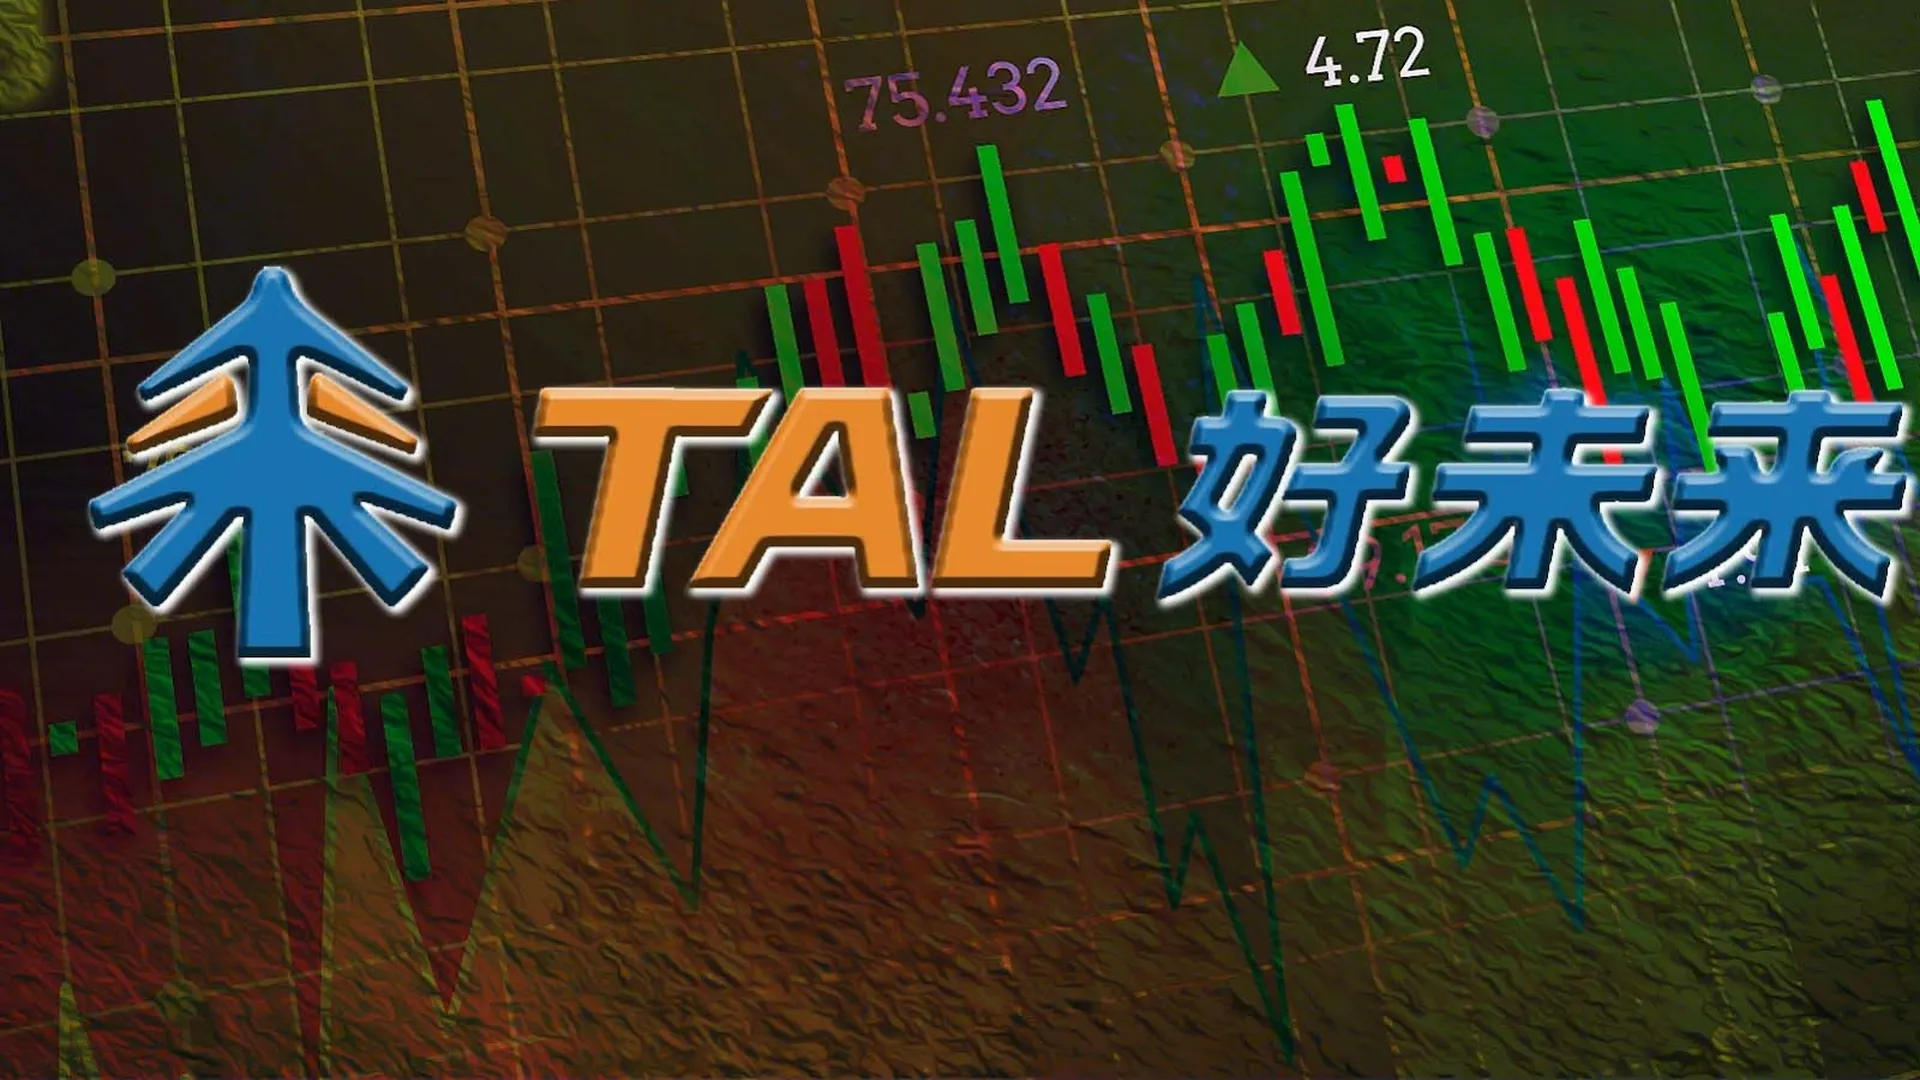 TAL Stock: TAL Stock Prepares for Quarter Results